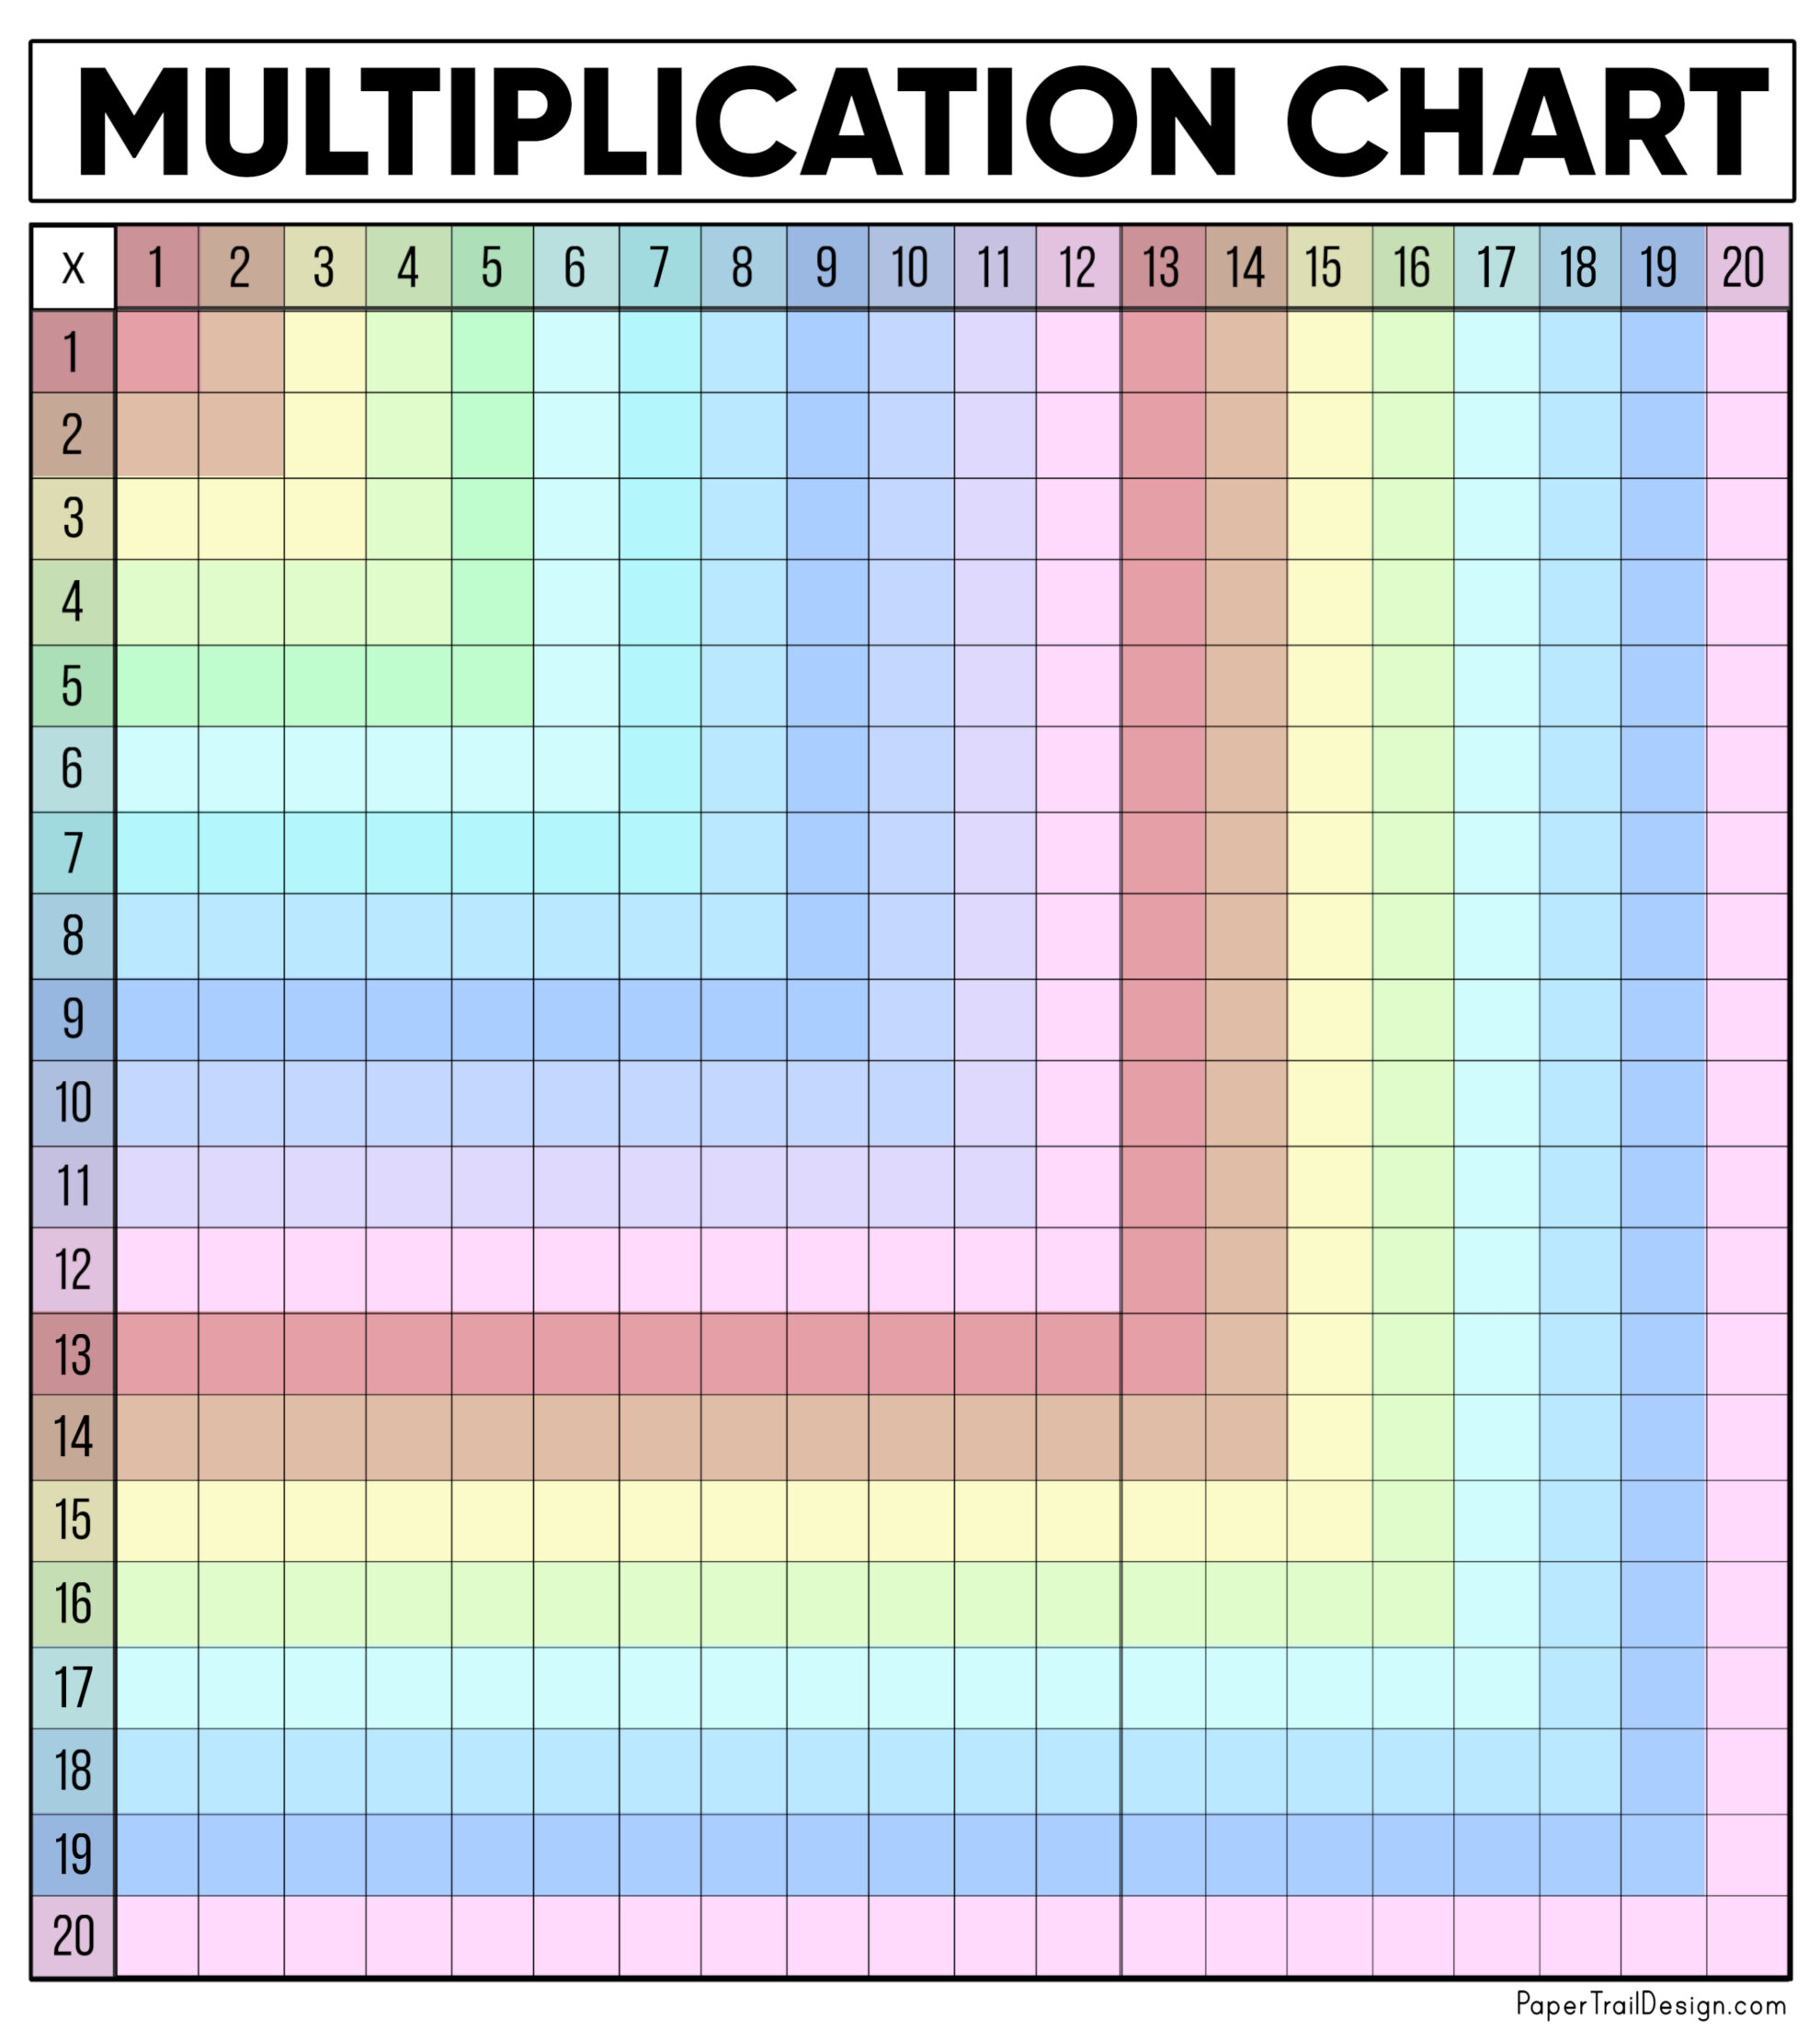 multiplication-tables-from-1-to-20-printable-pdf-elcho-table